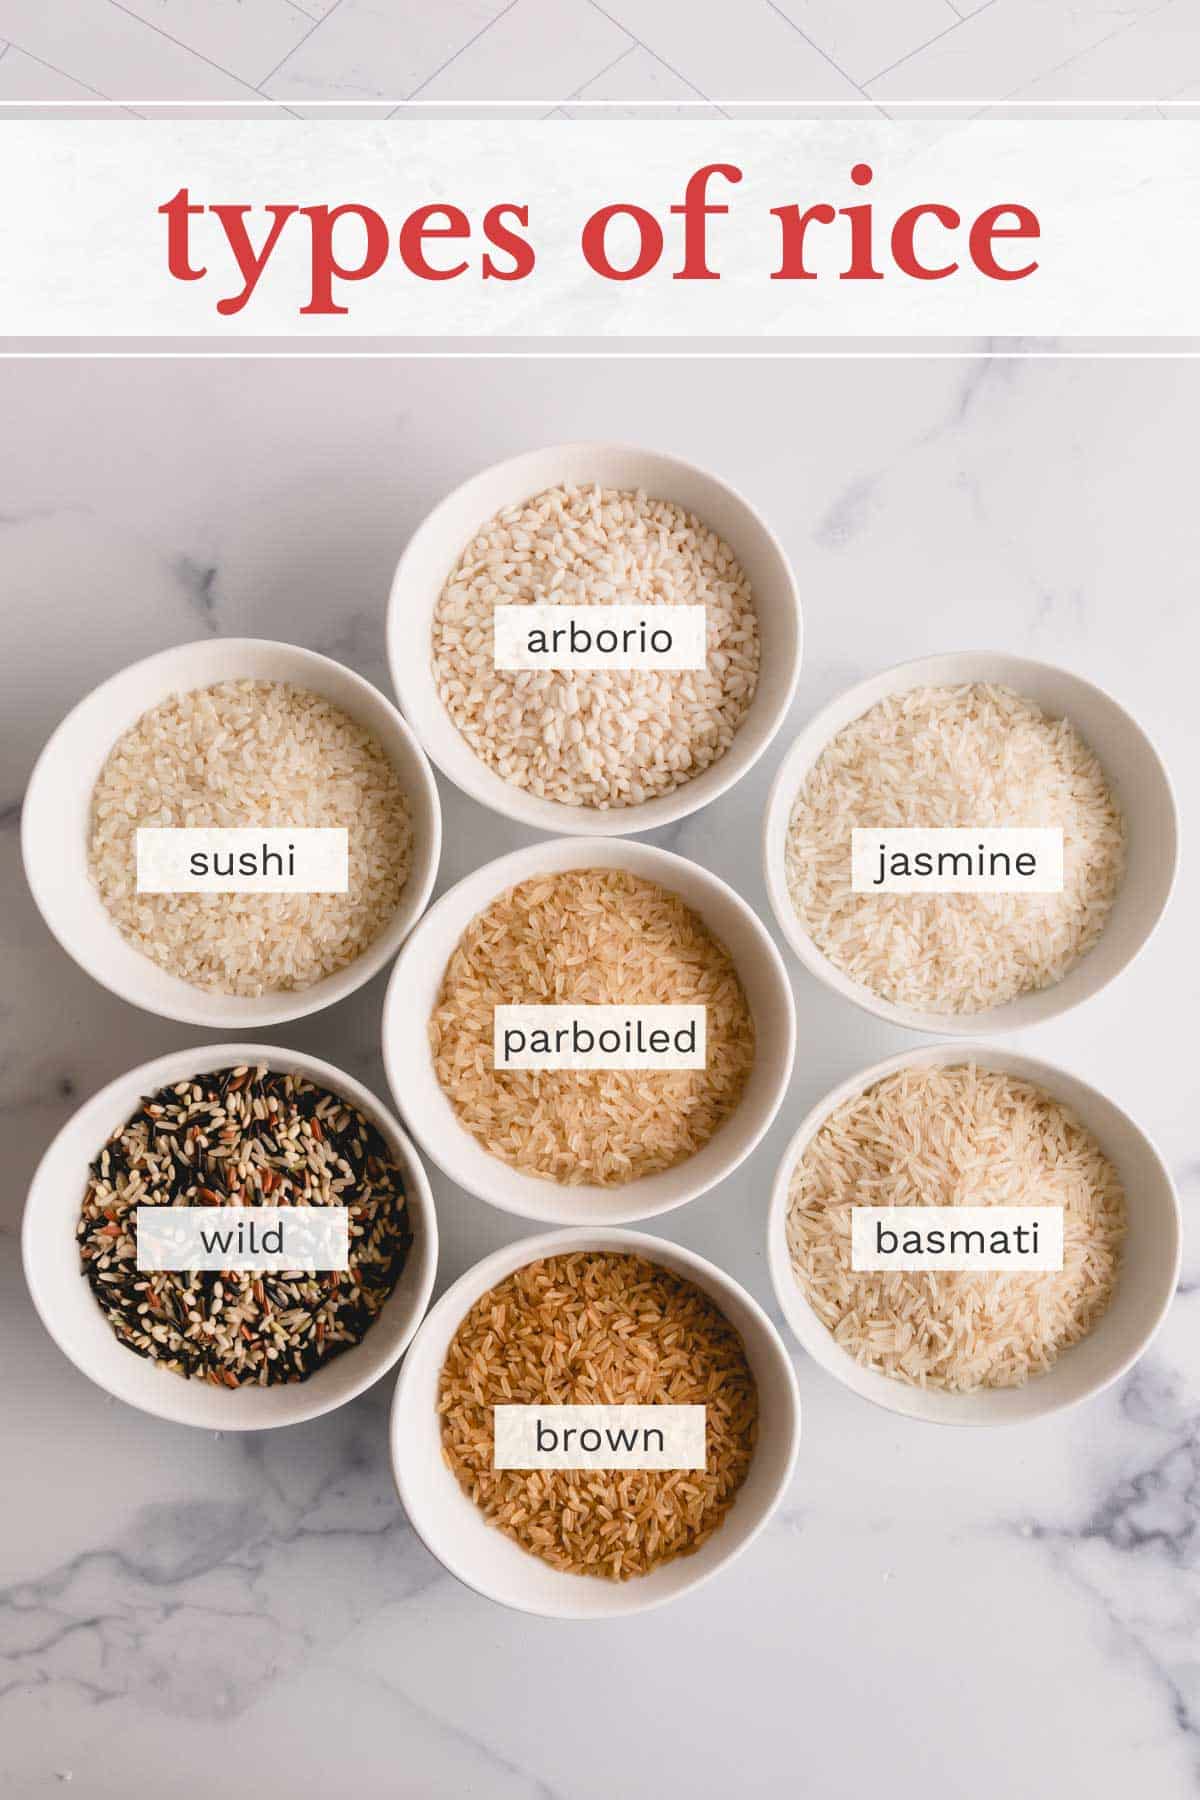 7 types of rice in separate white bowls.